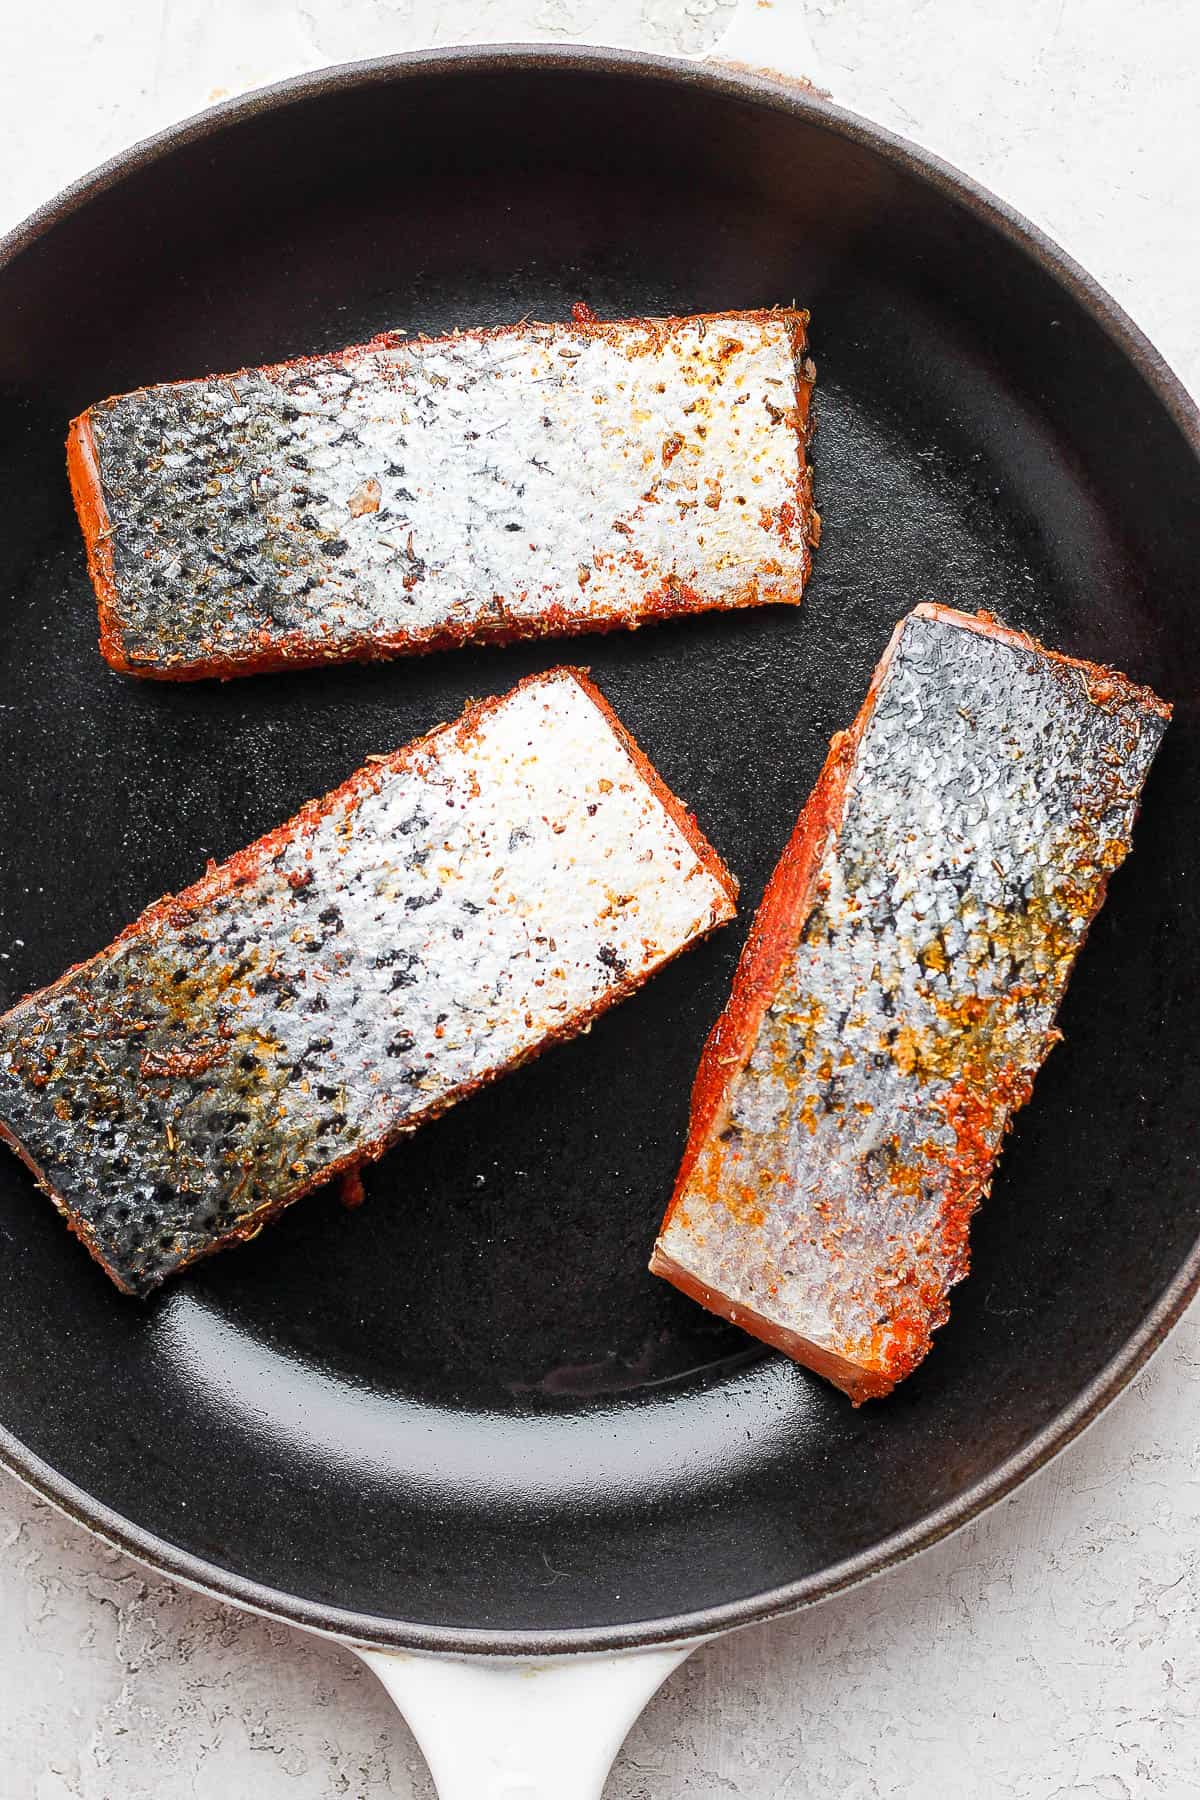 Salmon fillets in cast iron skillet with skin-side up.